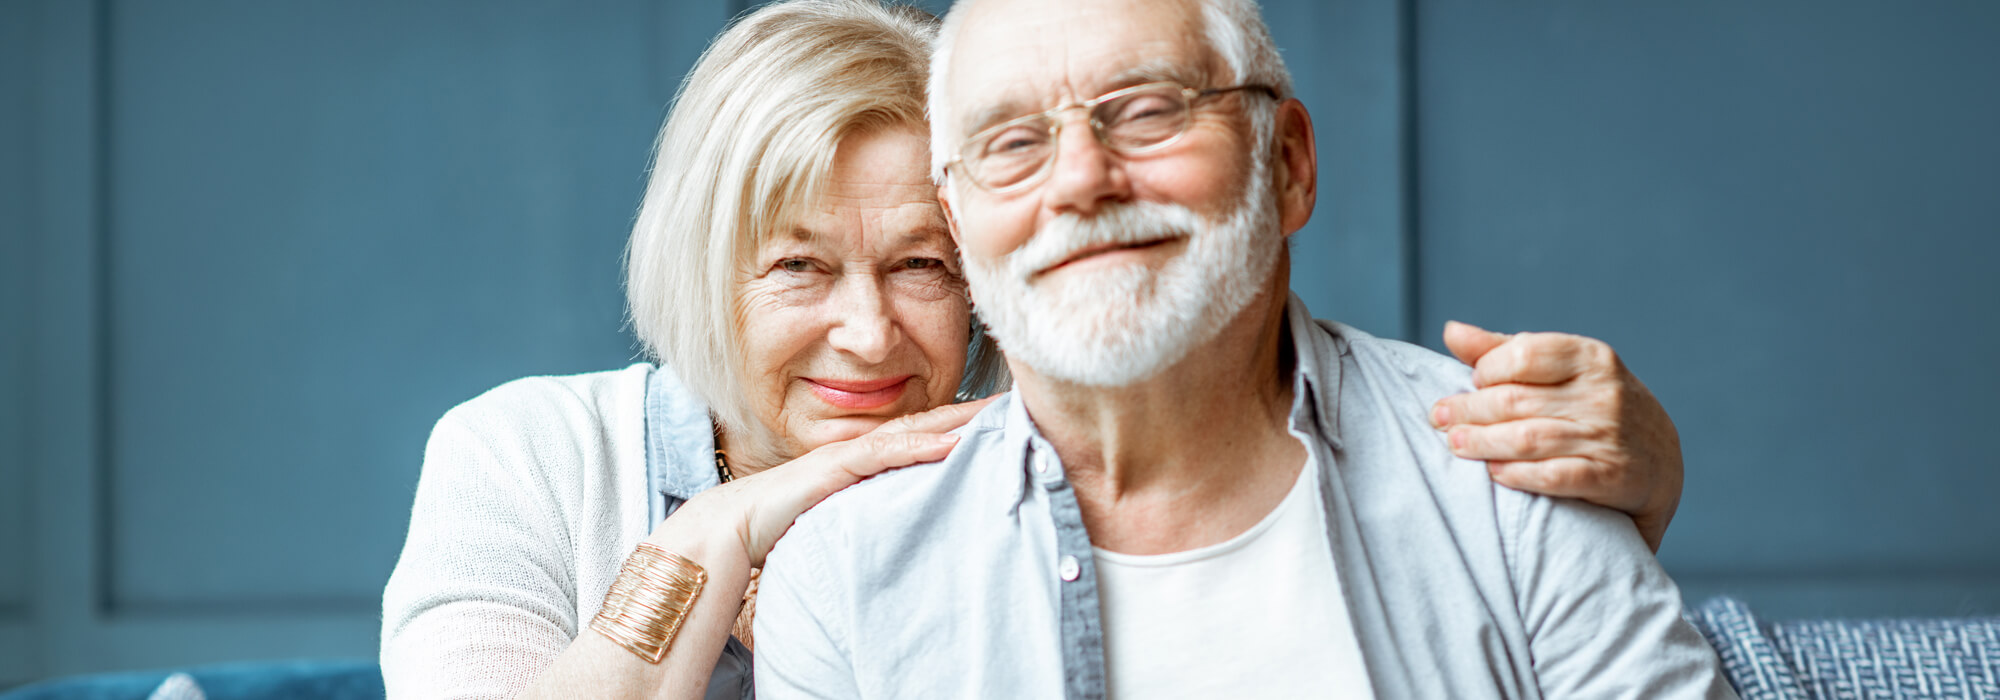 Portrait Of A Senior Couple At Home